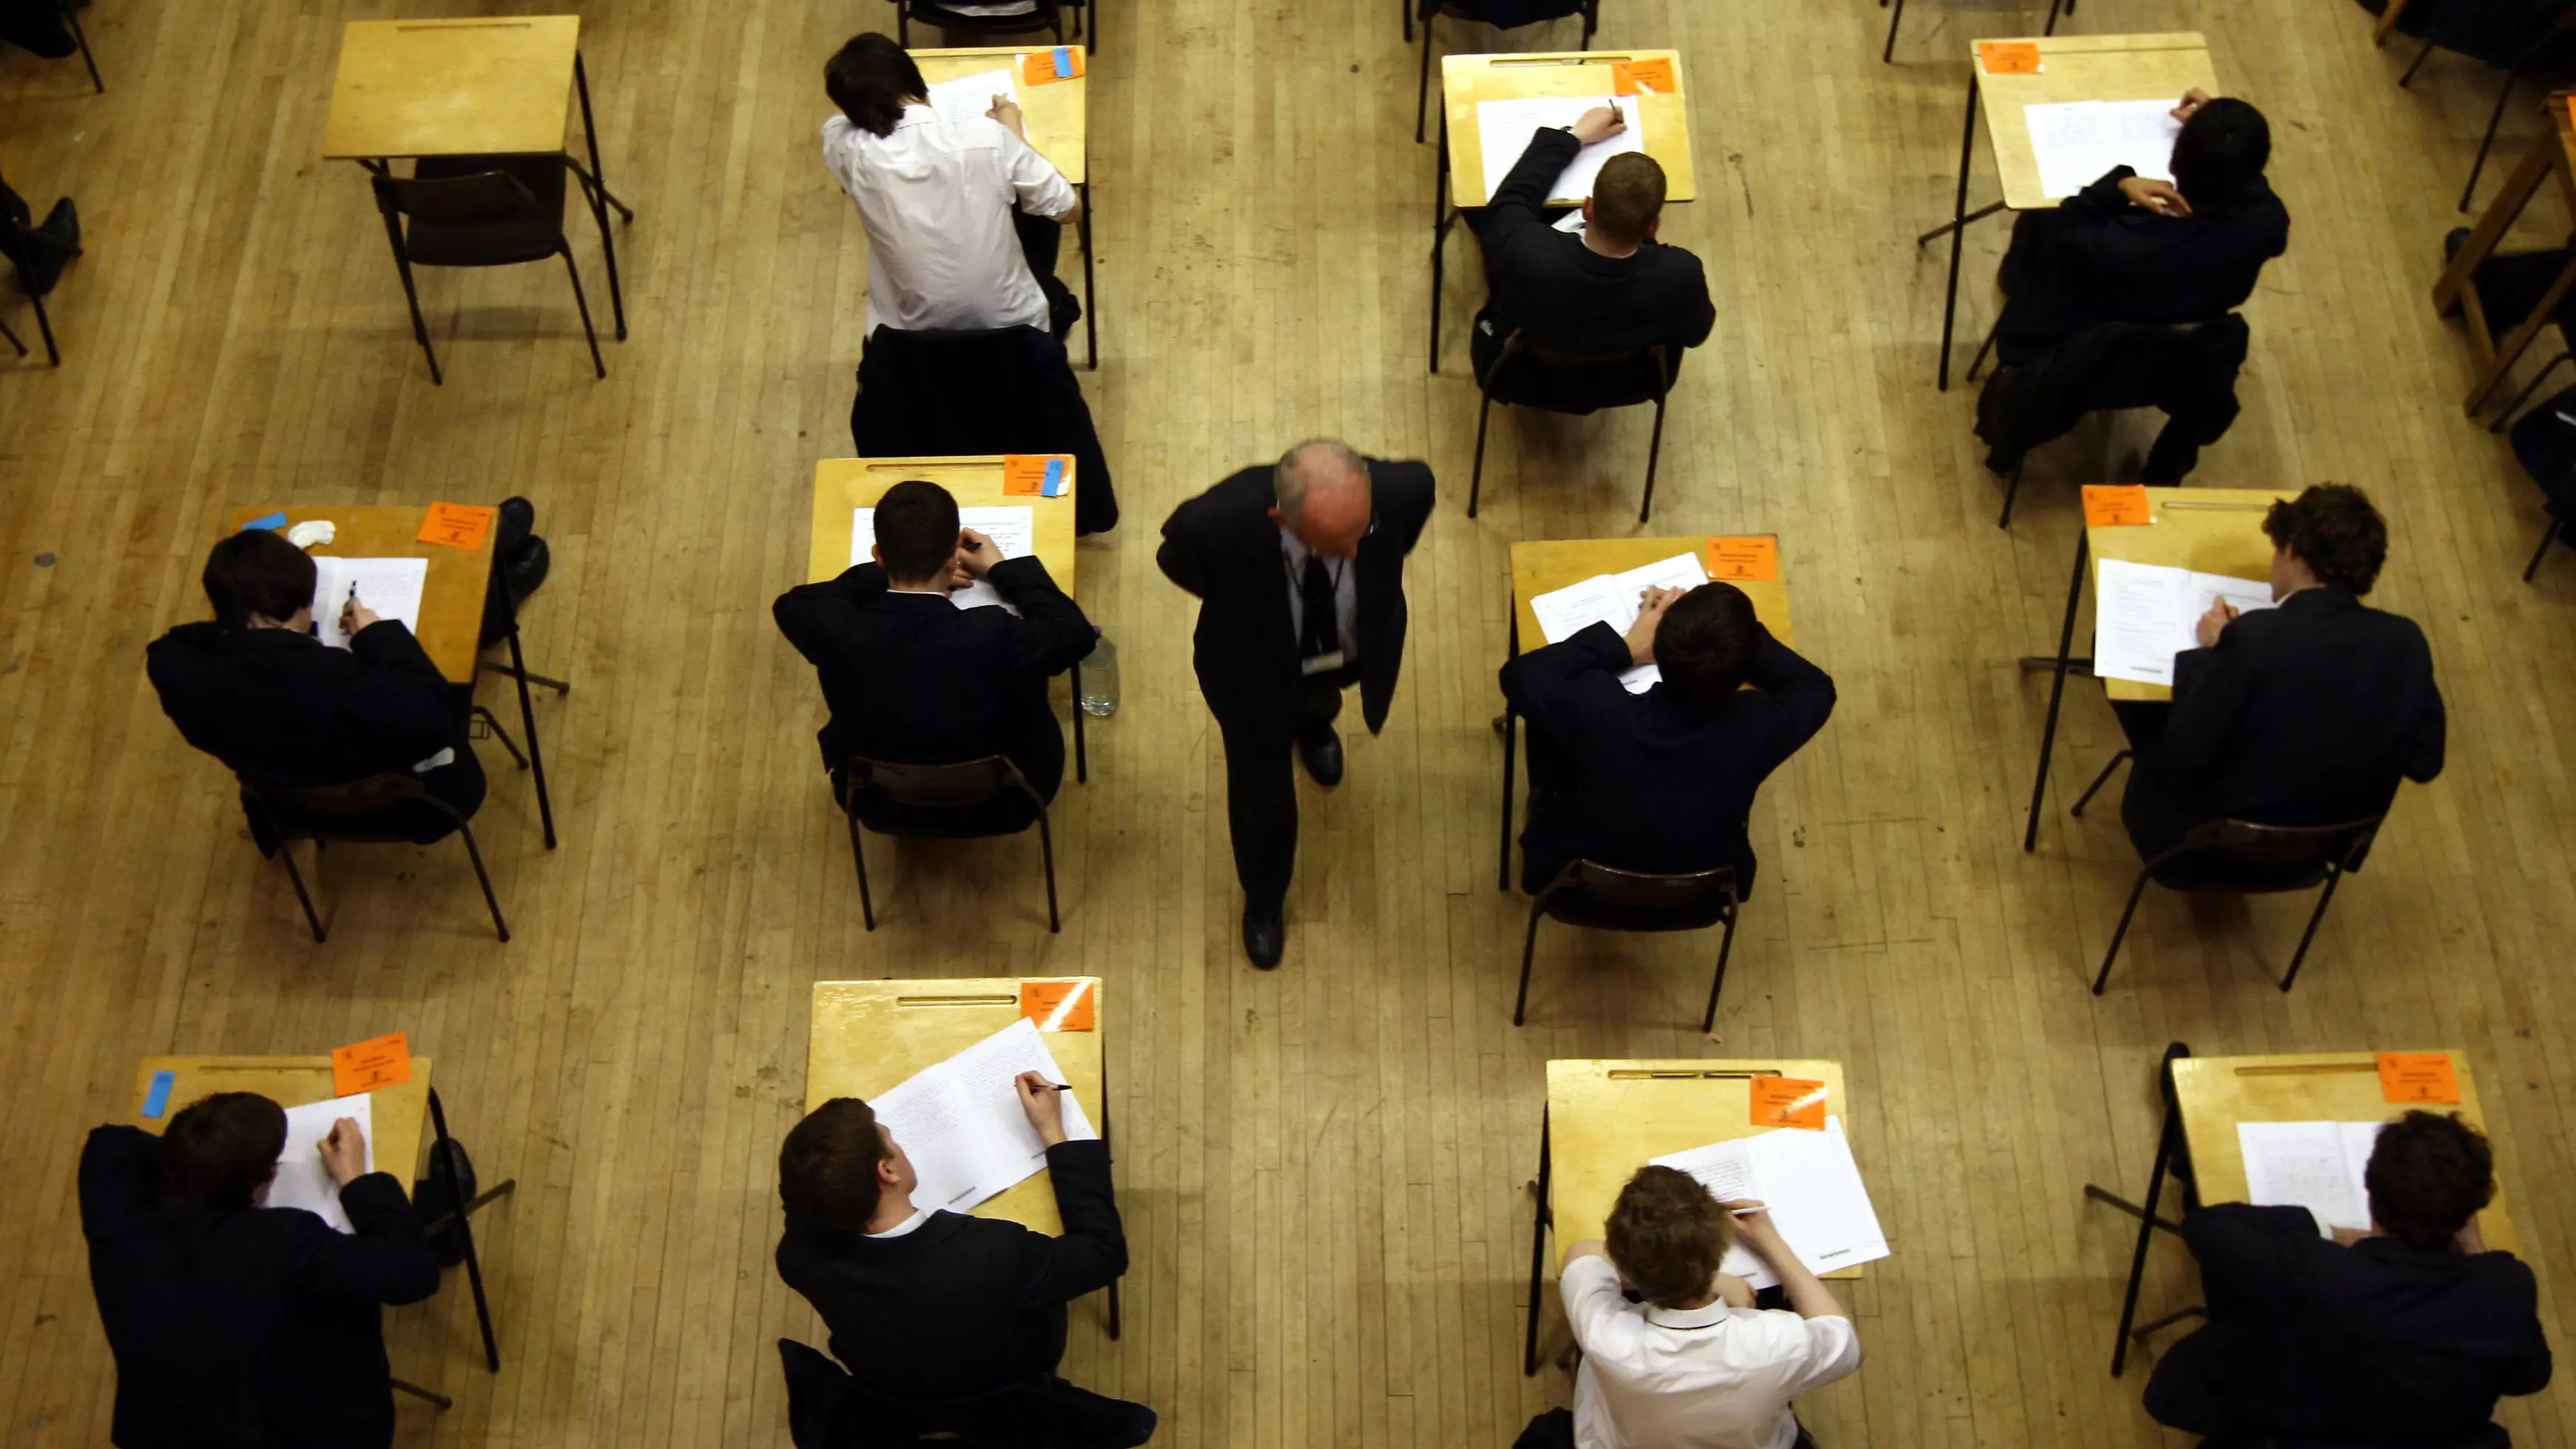 Wales To Scrap GCSE, AS And A-Level Exams For 2021